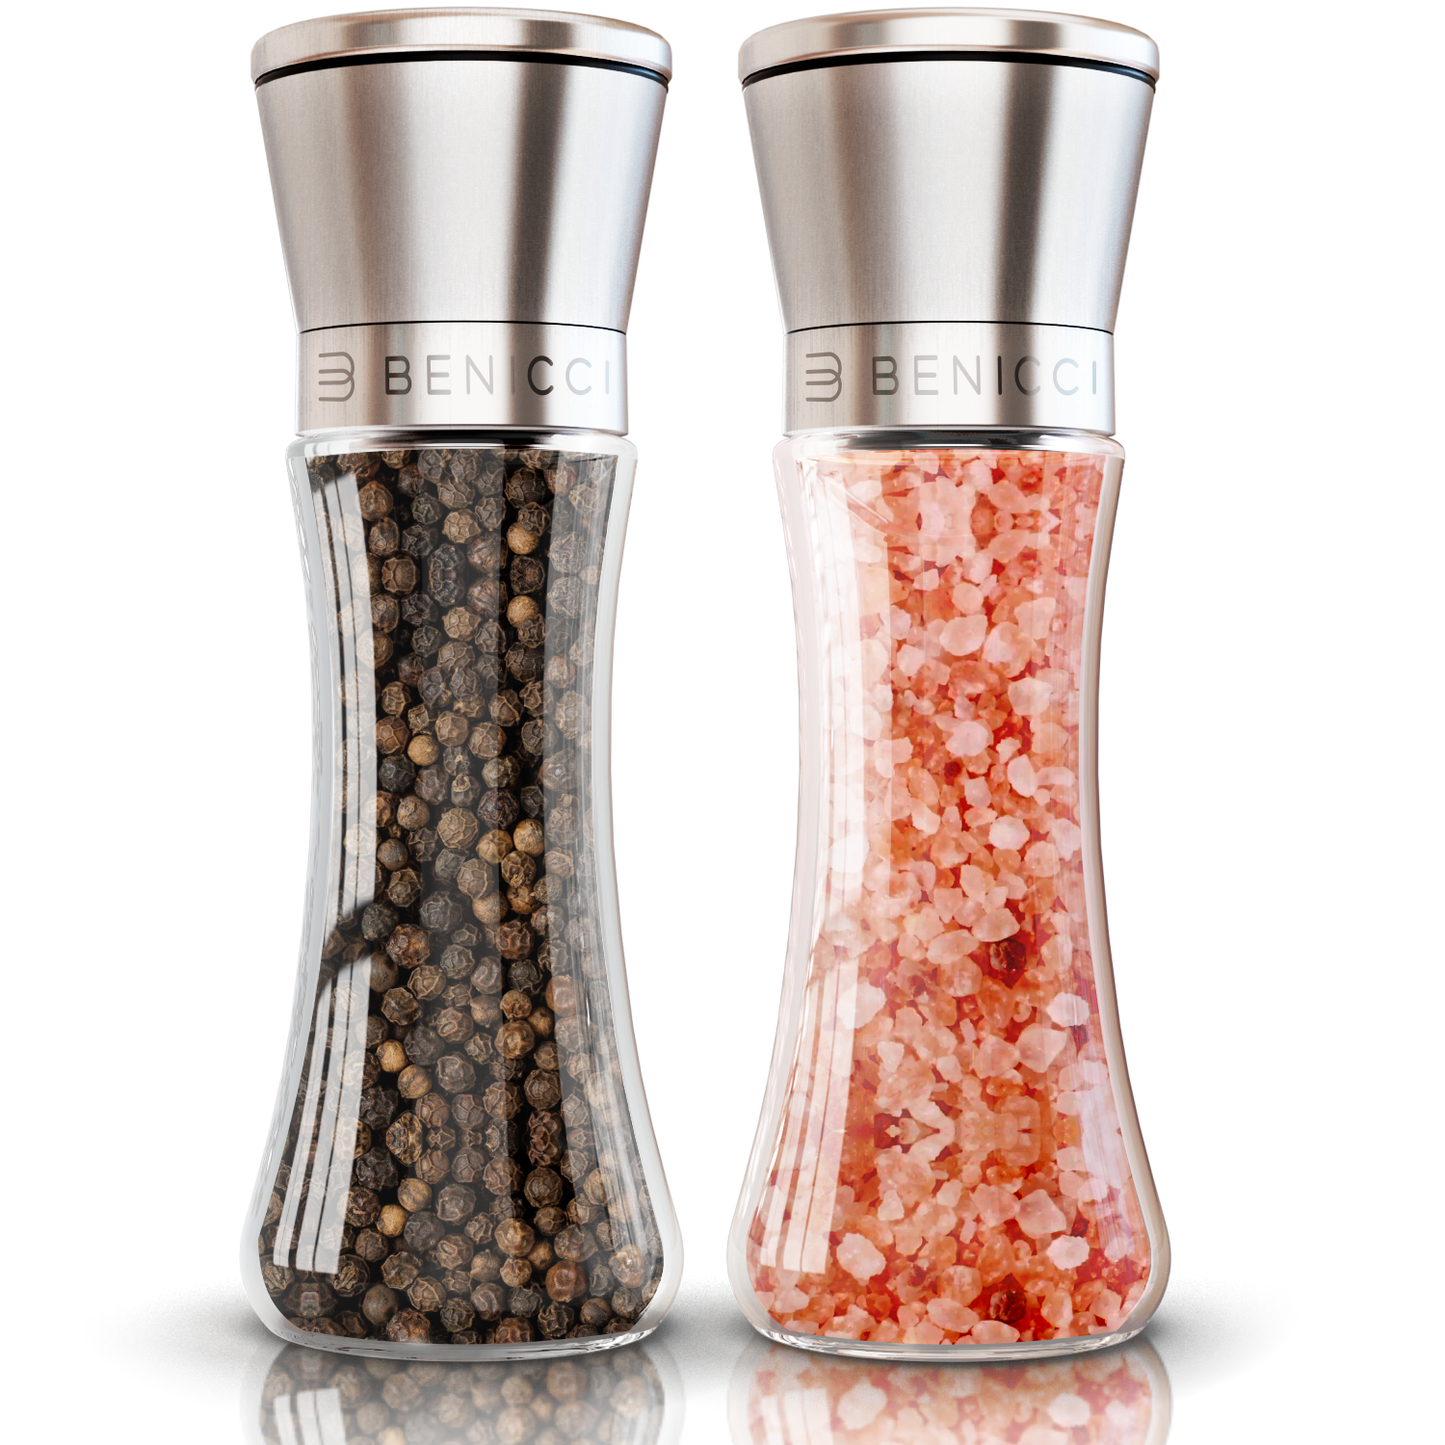 15 Best Salt and Pepper Grinders, Shakers, and Mills 2020